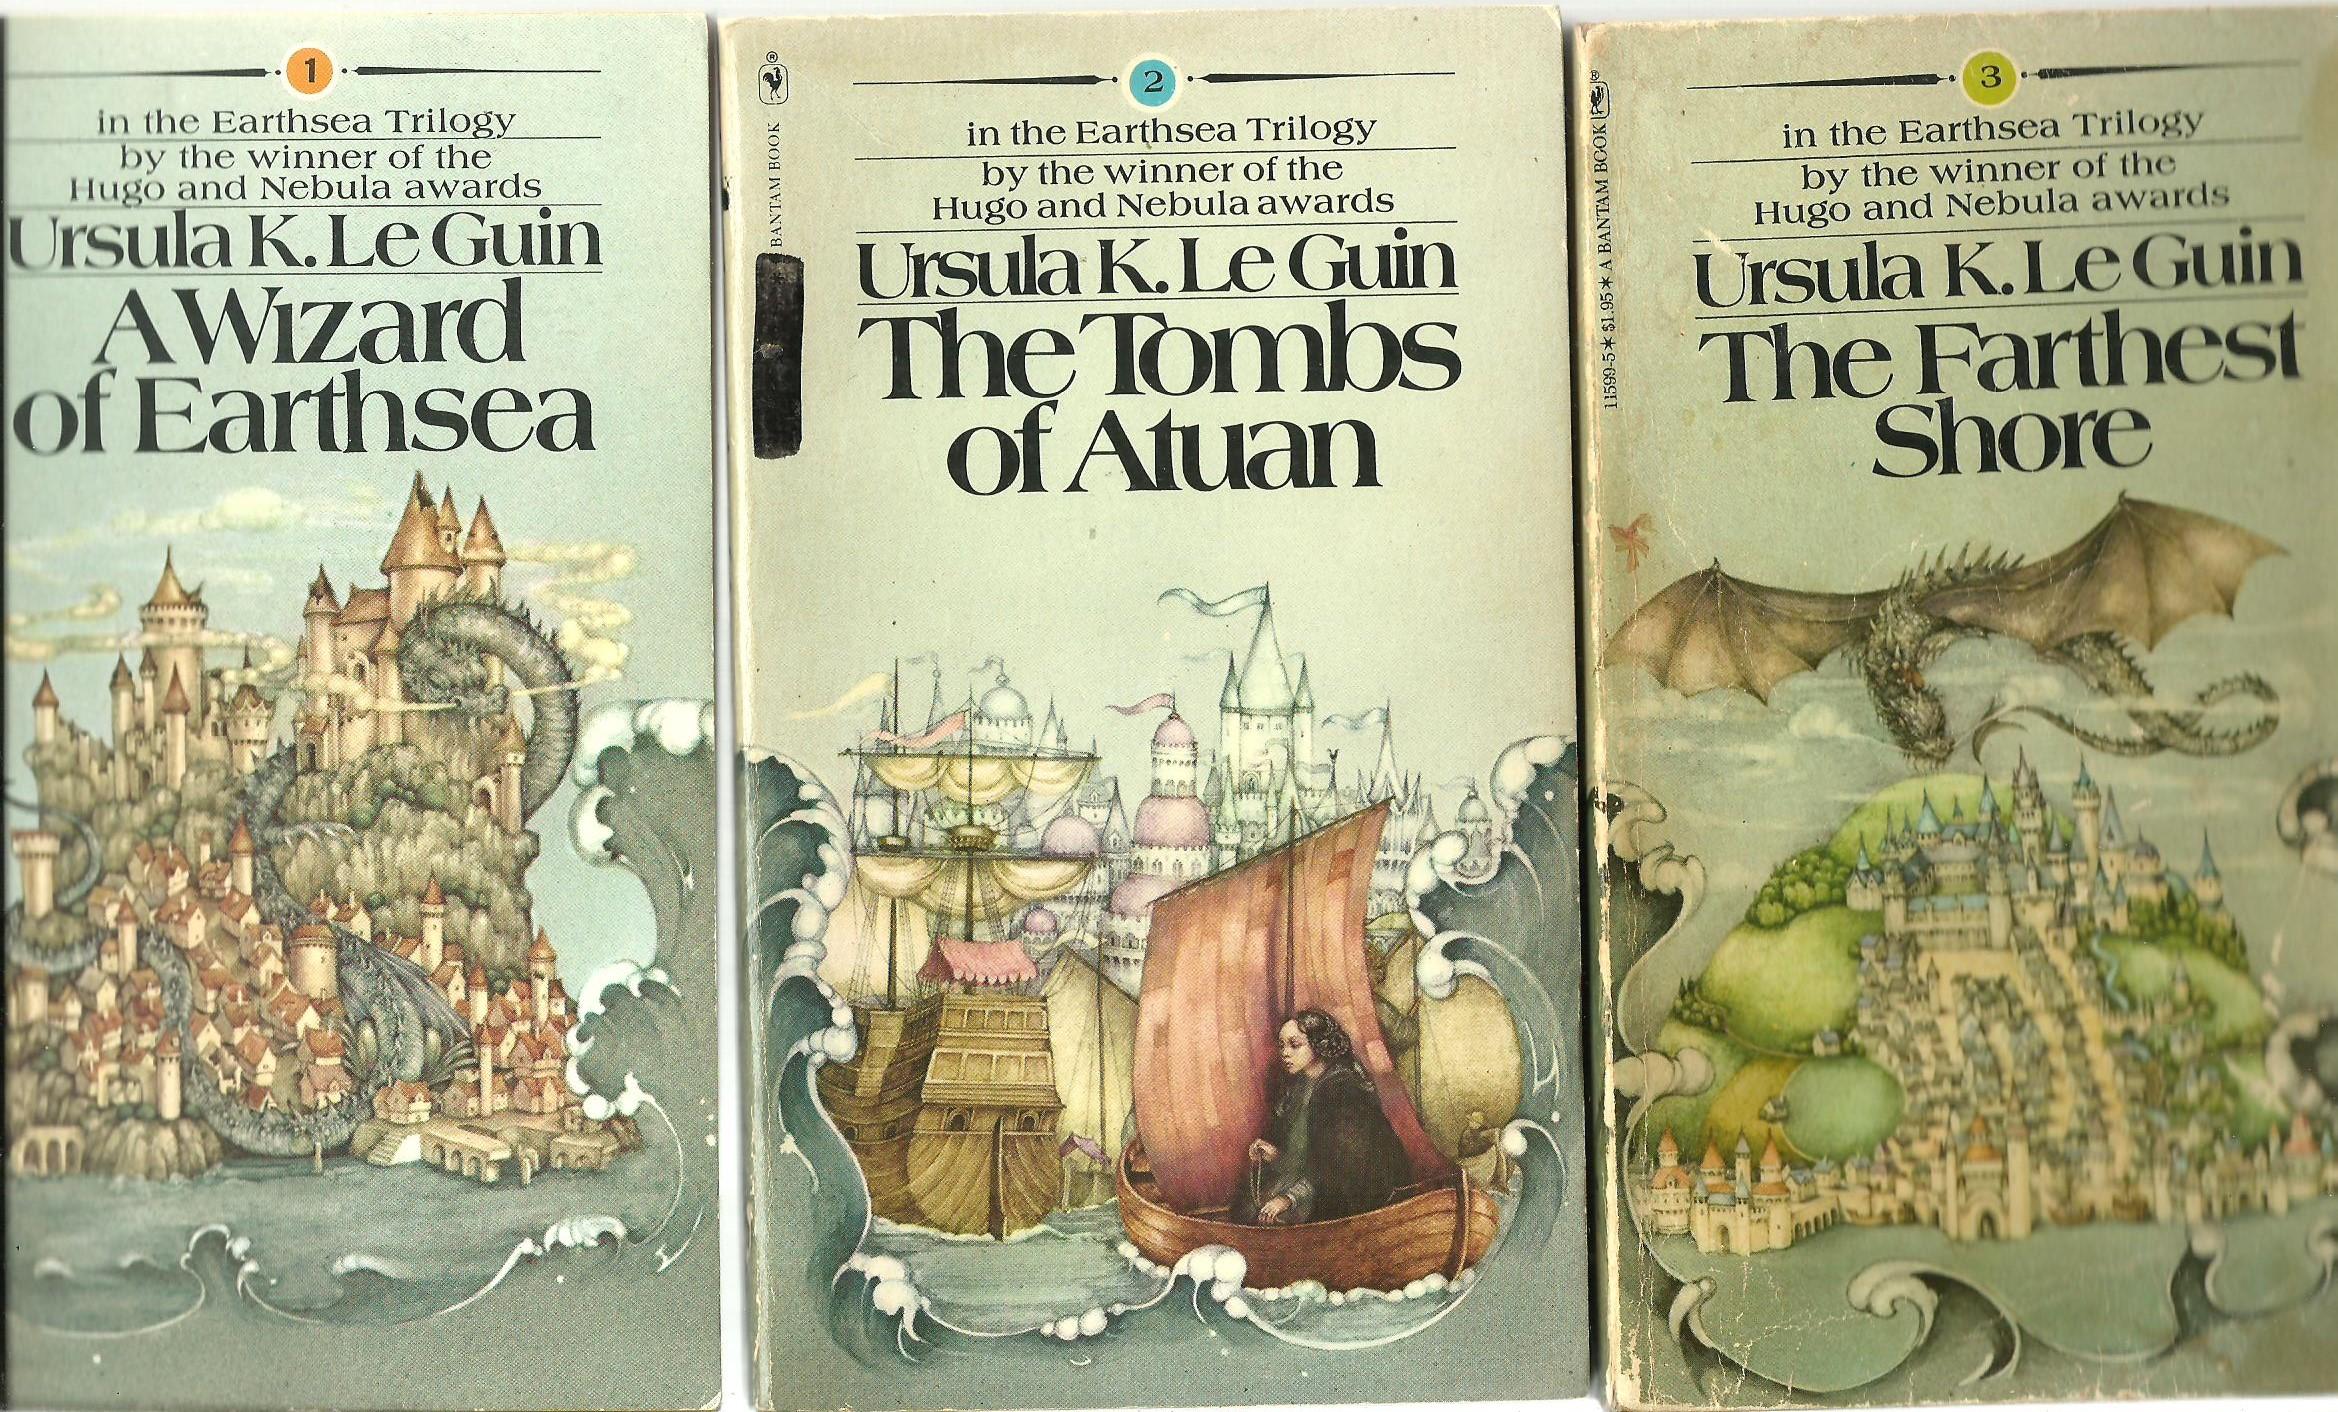 The Earthsea Trilogy - A Wizard of Earthsea, The Tombs of Atuan, The Farthest Shore (3 Volume Set) by Ursula K. Le Guin: Good Soft cover (1900) | Sabra Books